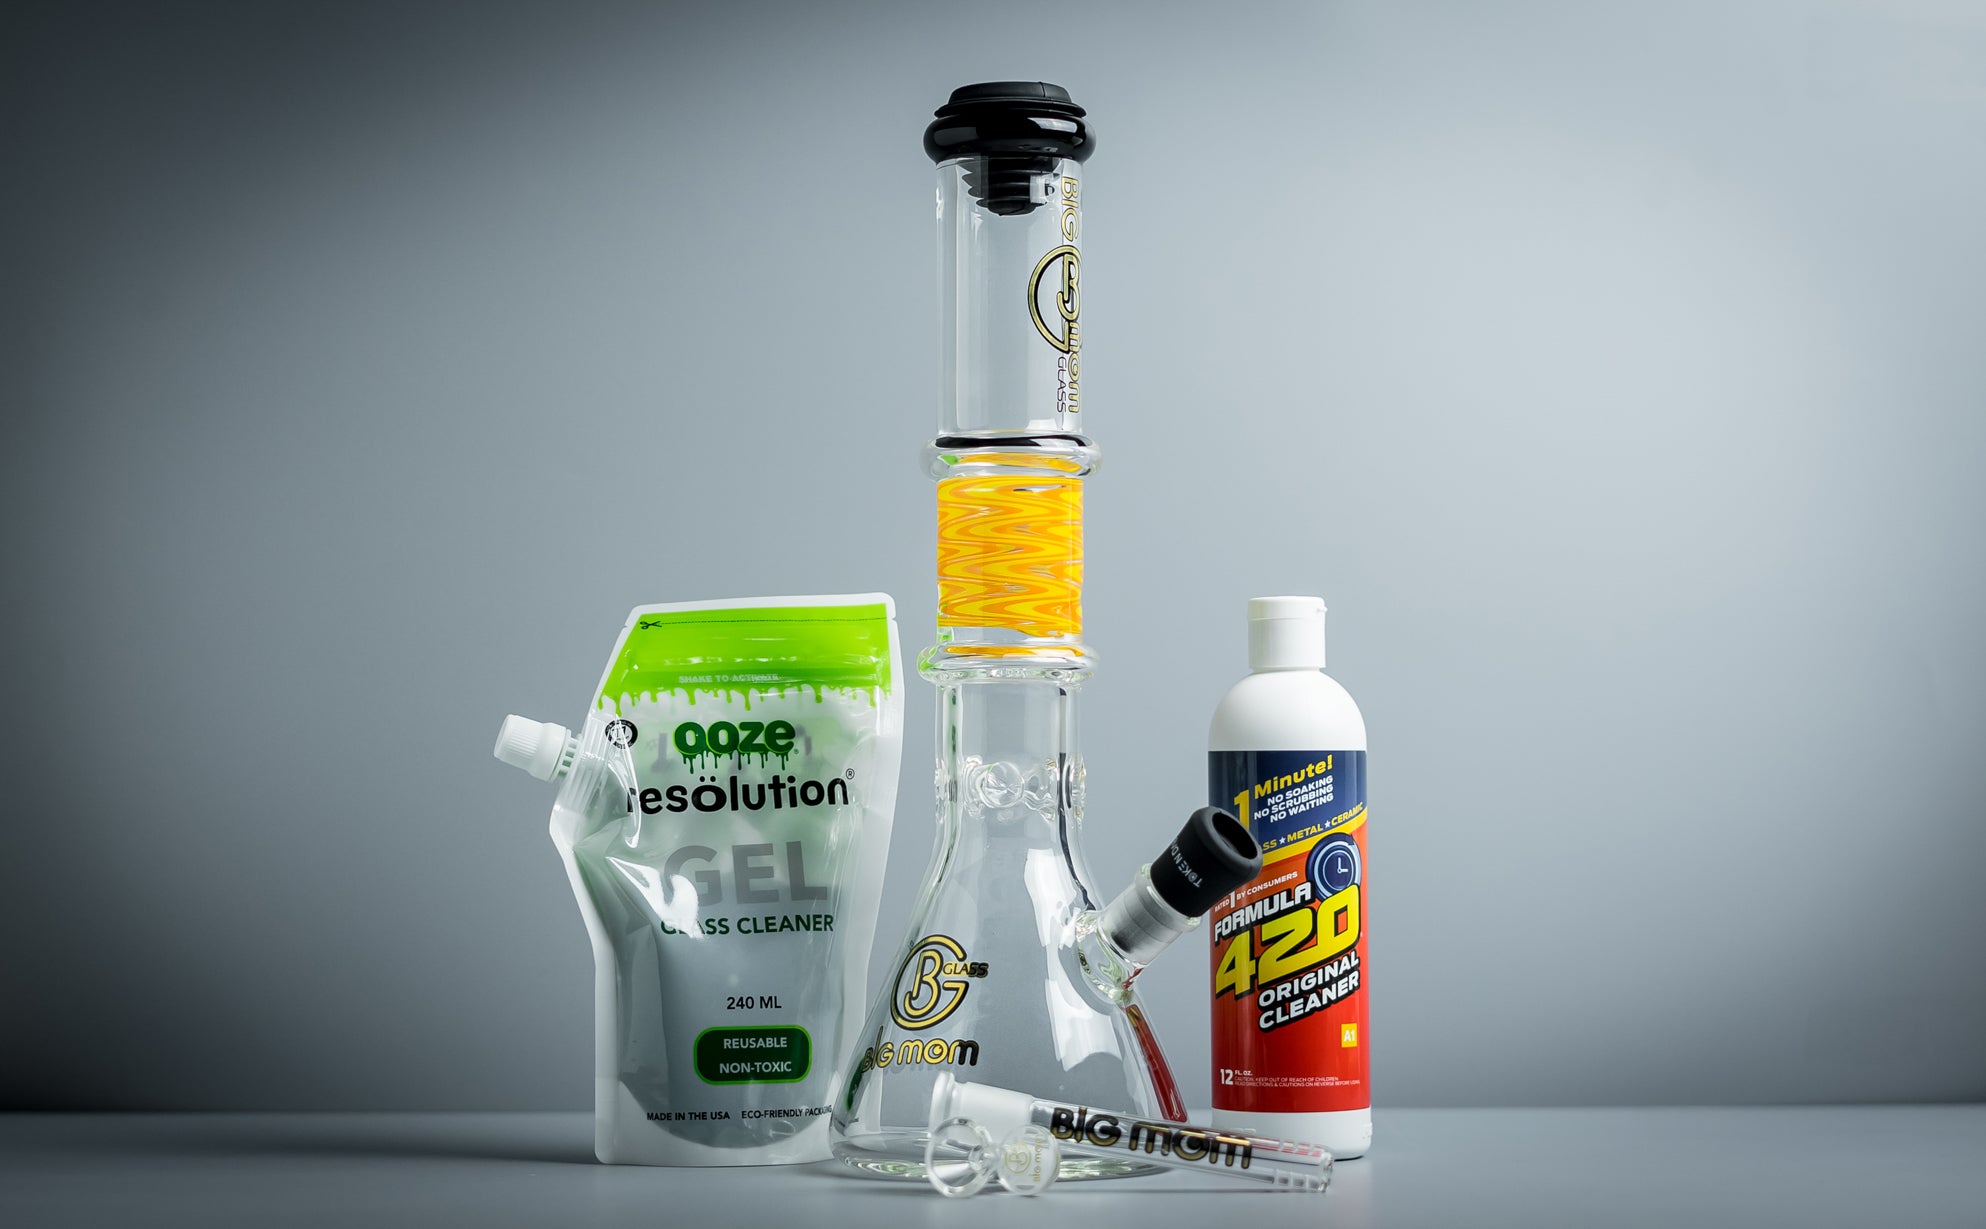 Bong Cleaning Kit, Pipe Cleaning Kit